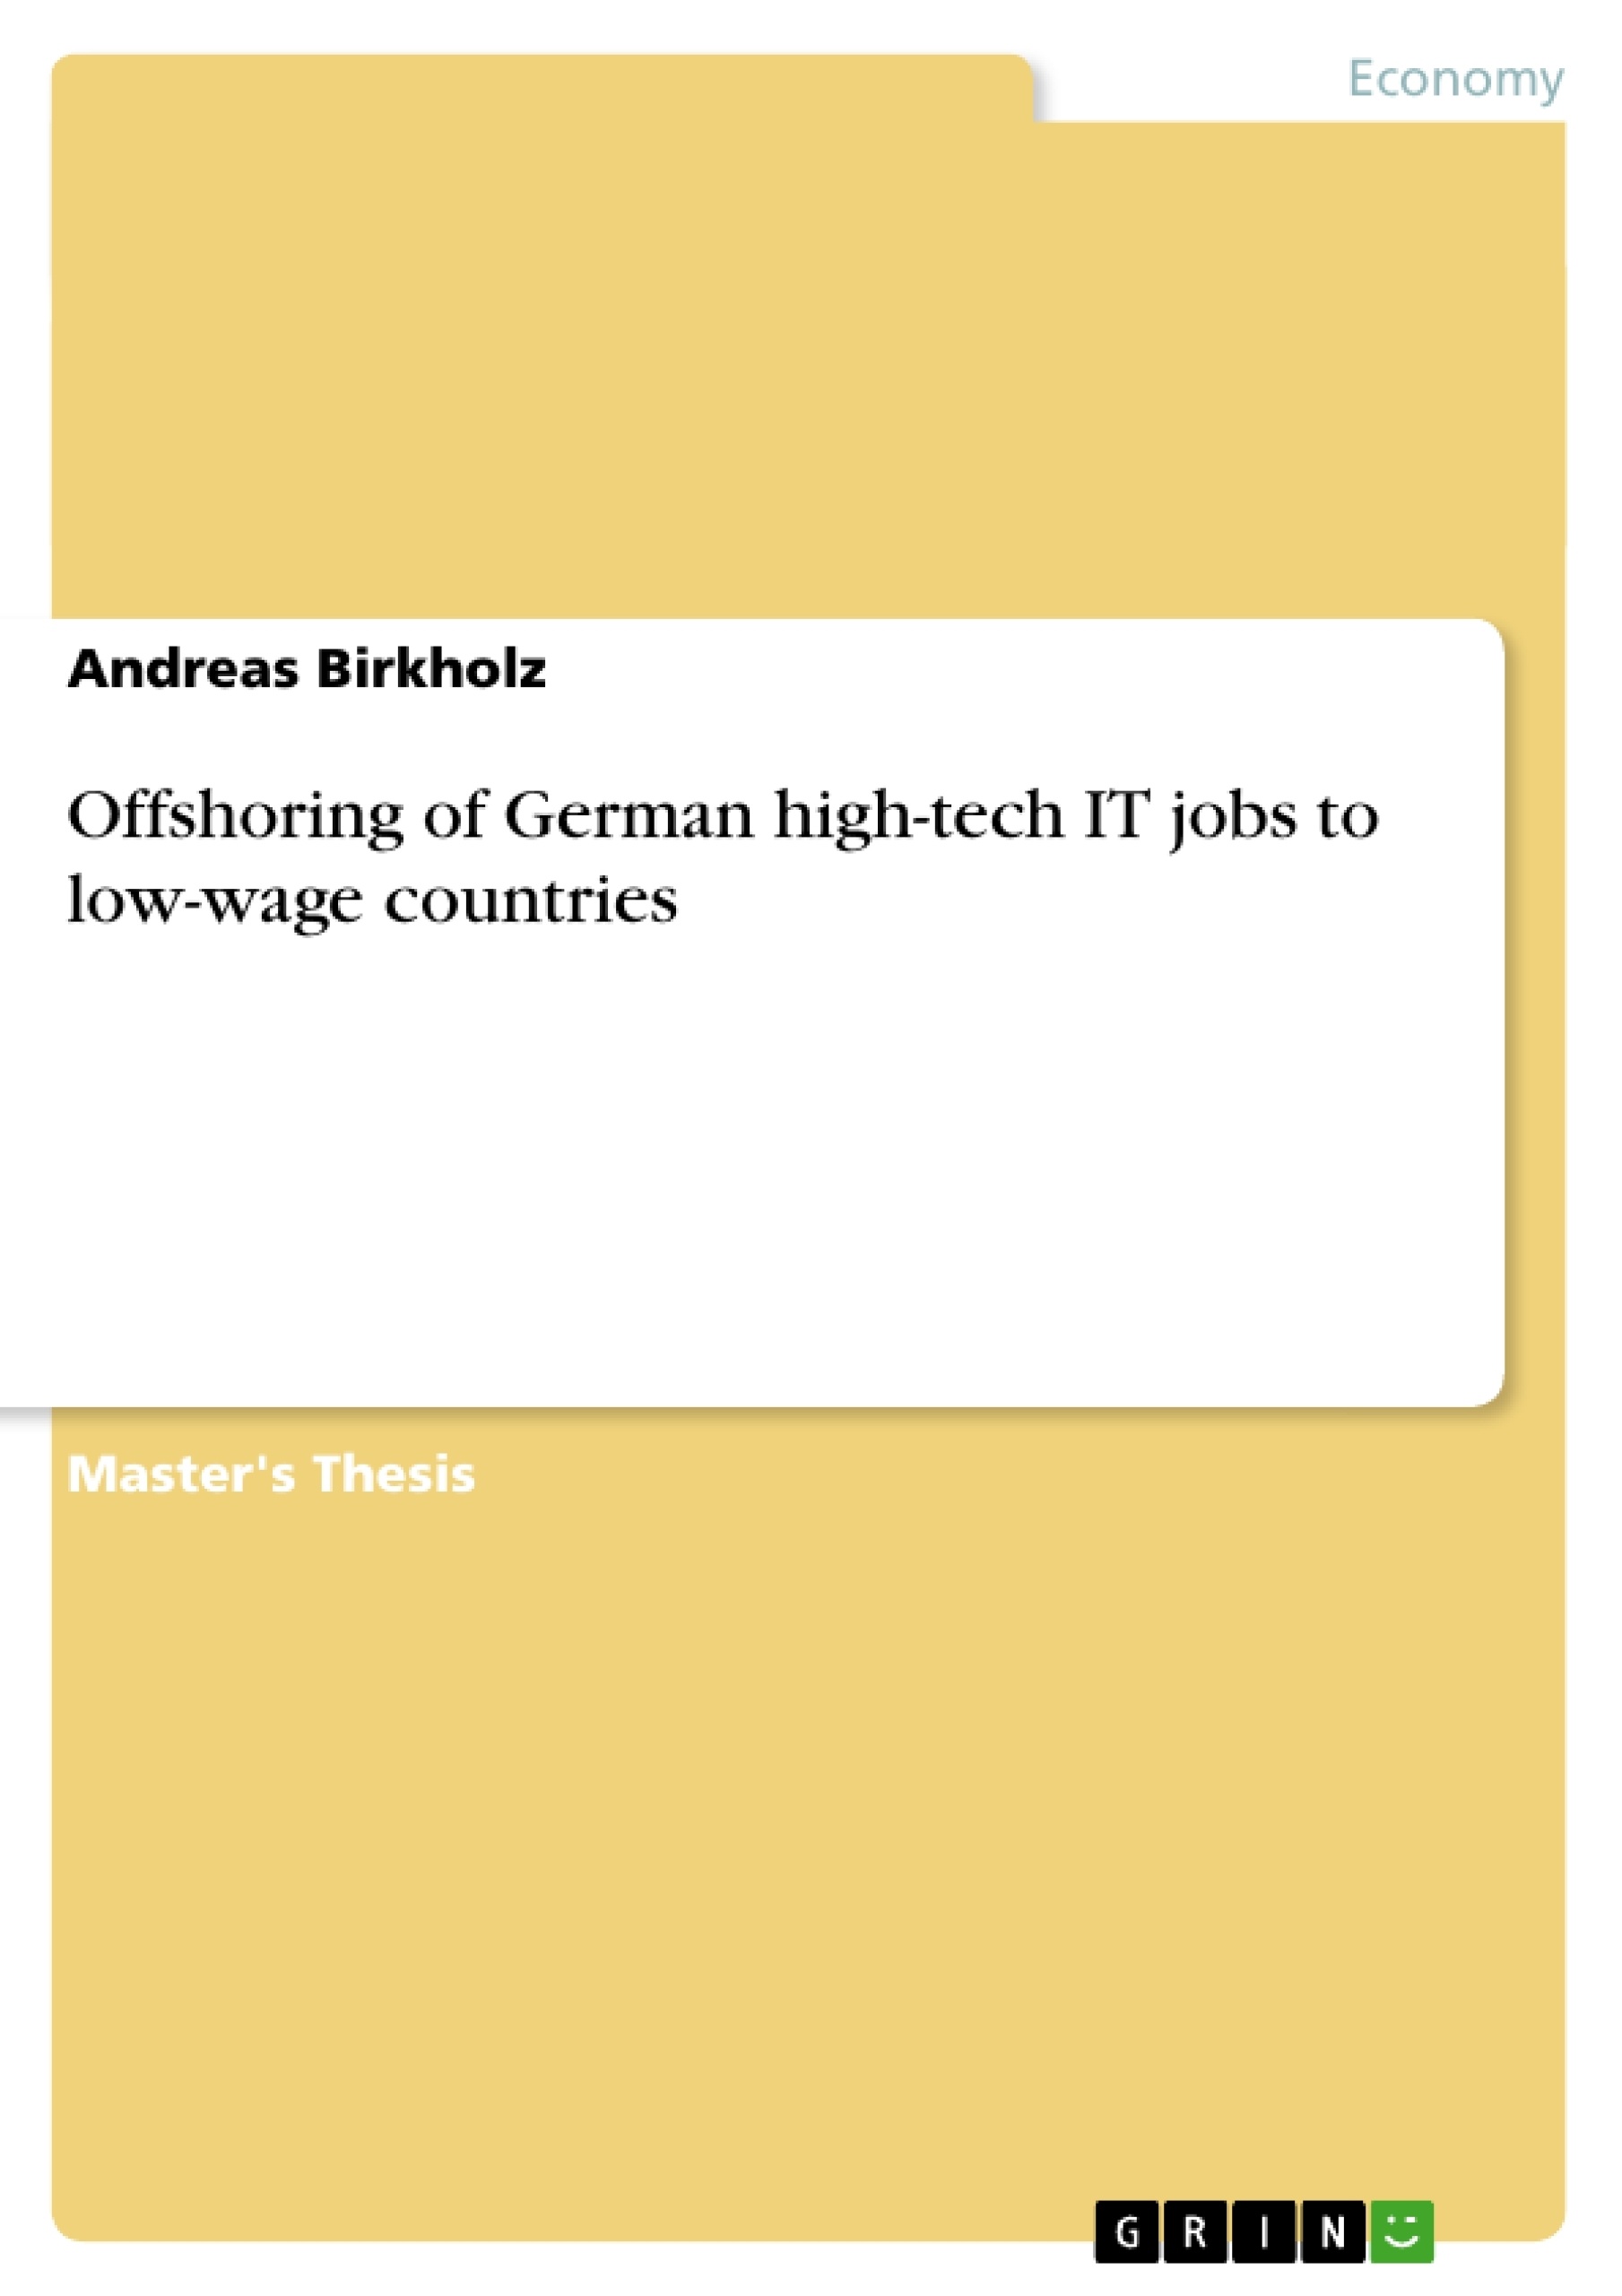 Title: Offshoring of German high-tech IT jobs to low-wage countries